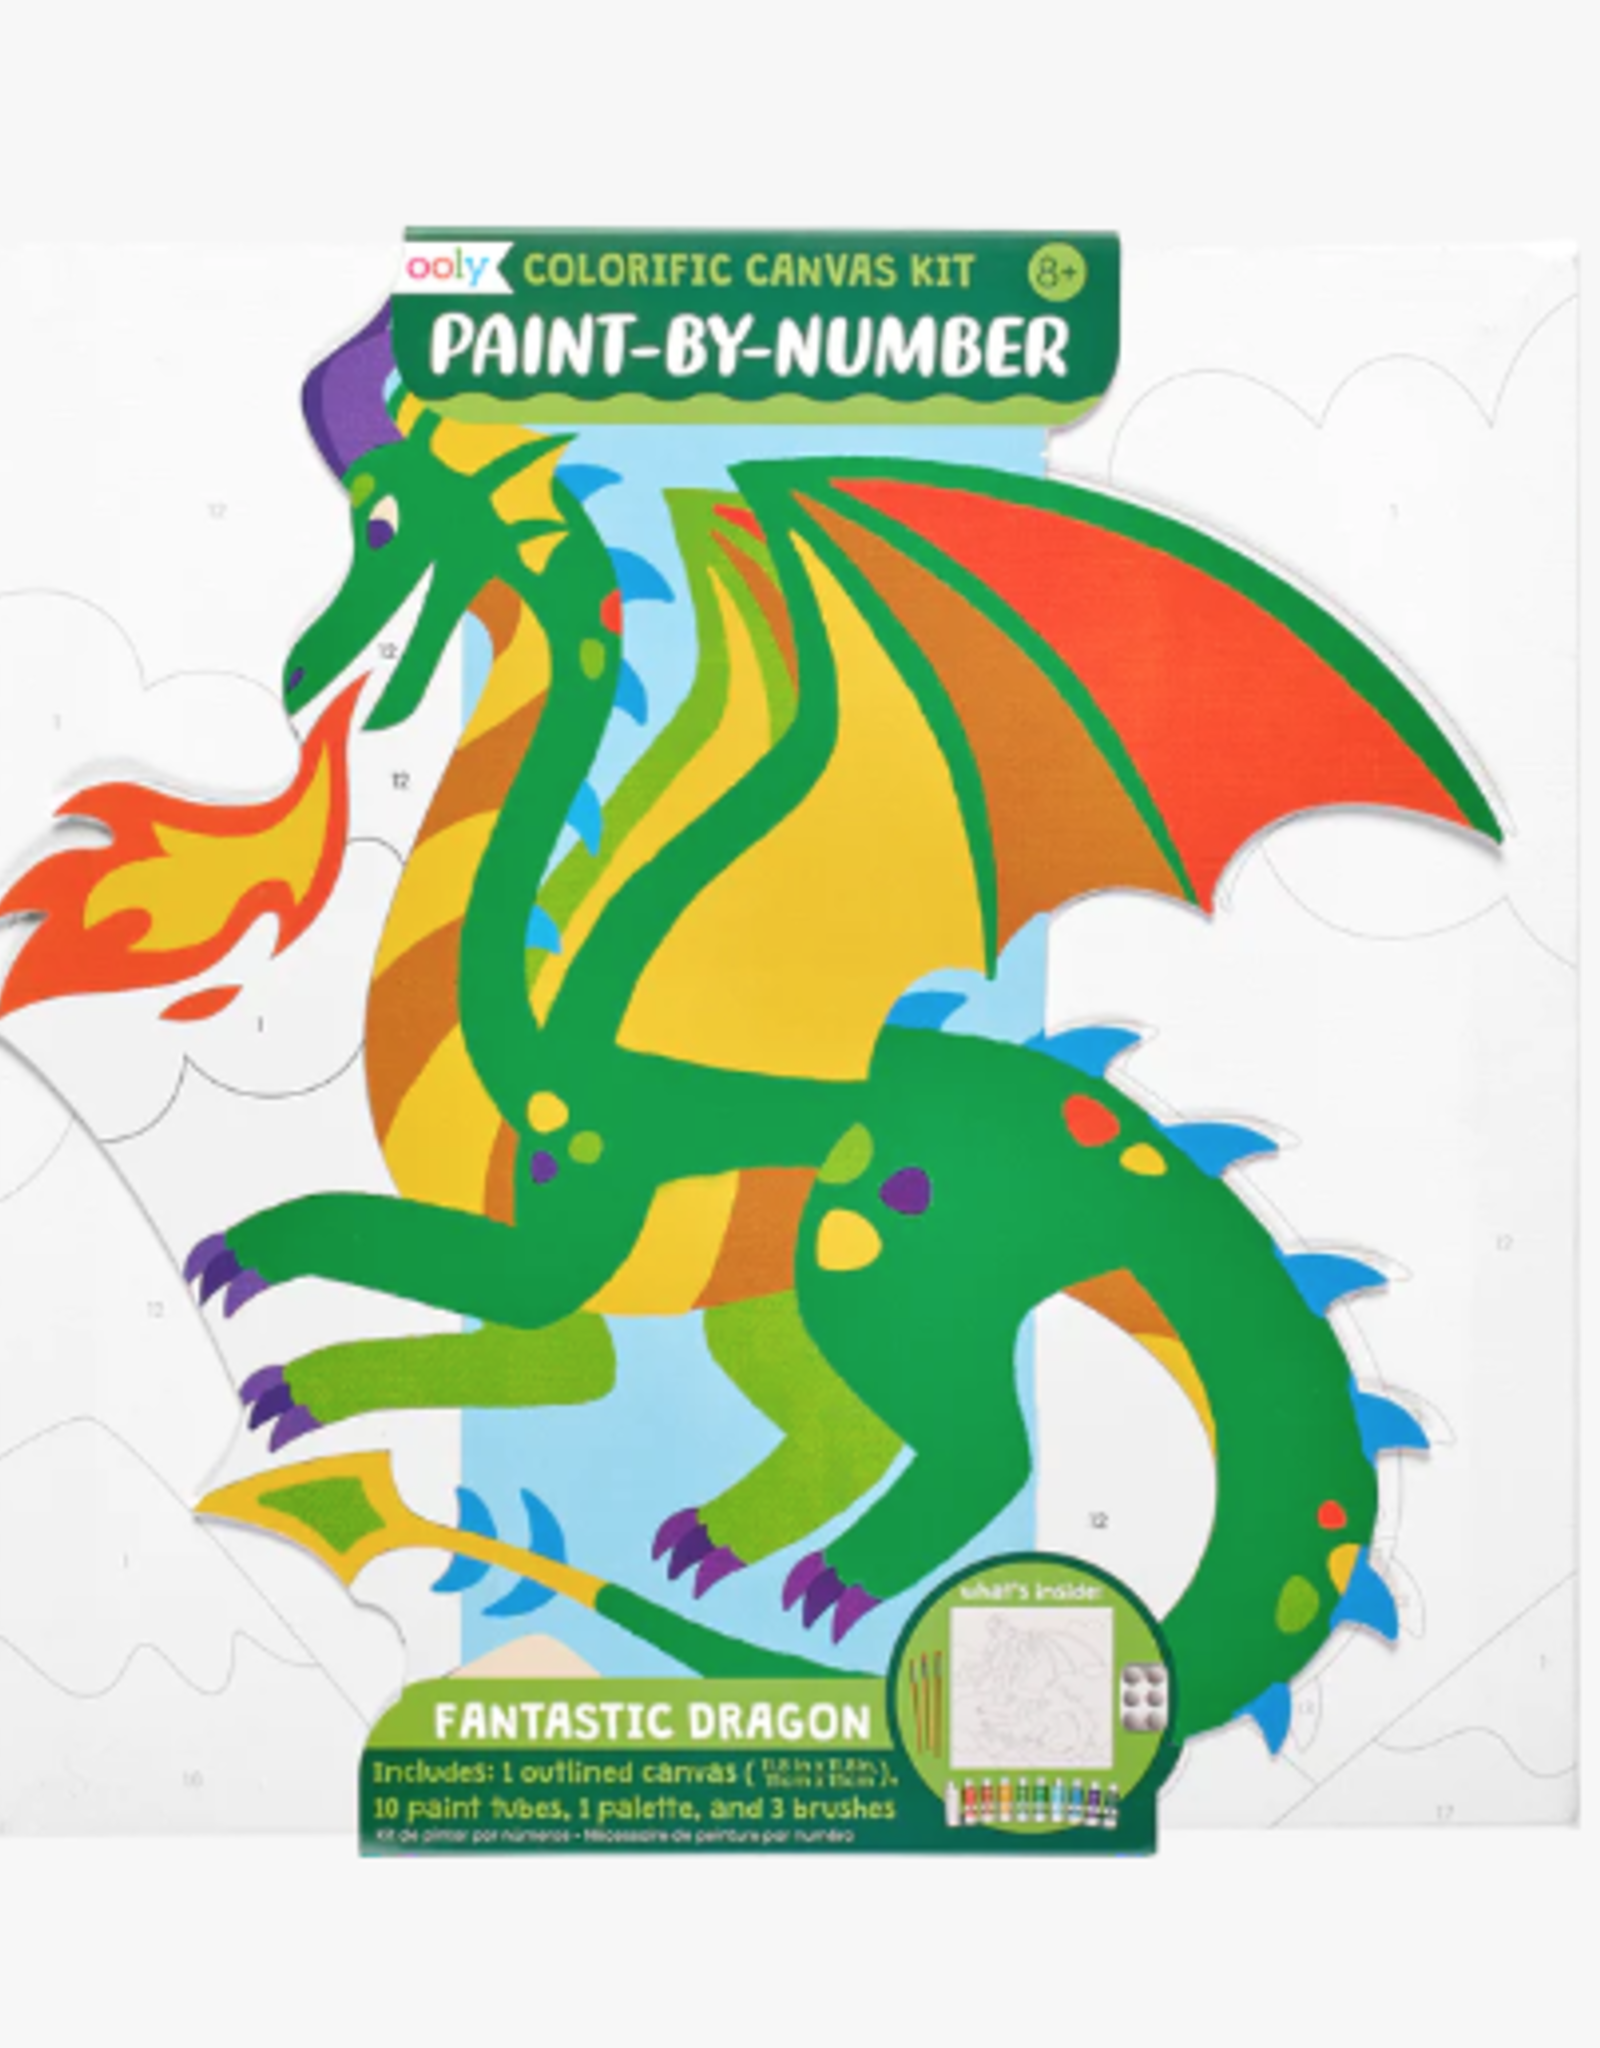 Ooly Colorific Canvas Paint By Number Kit Fantastic Dragon